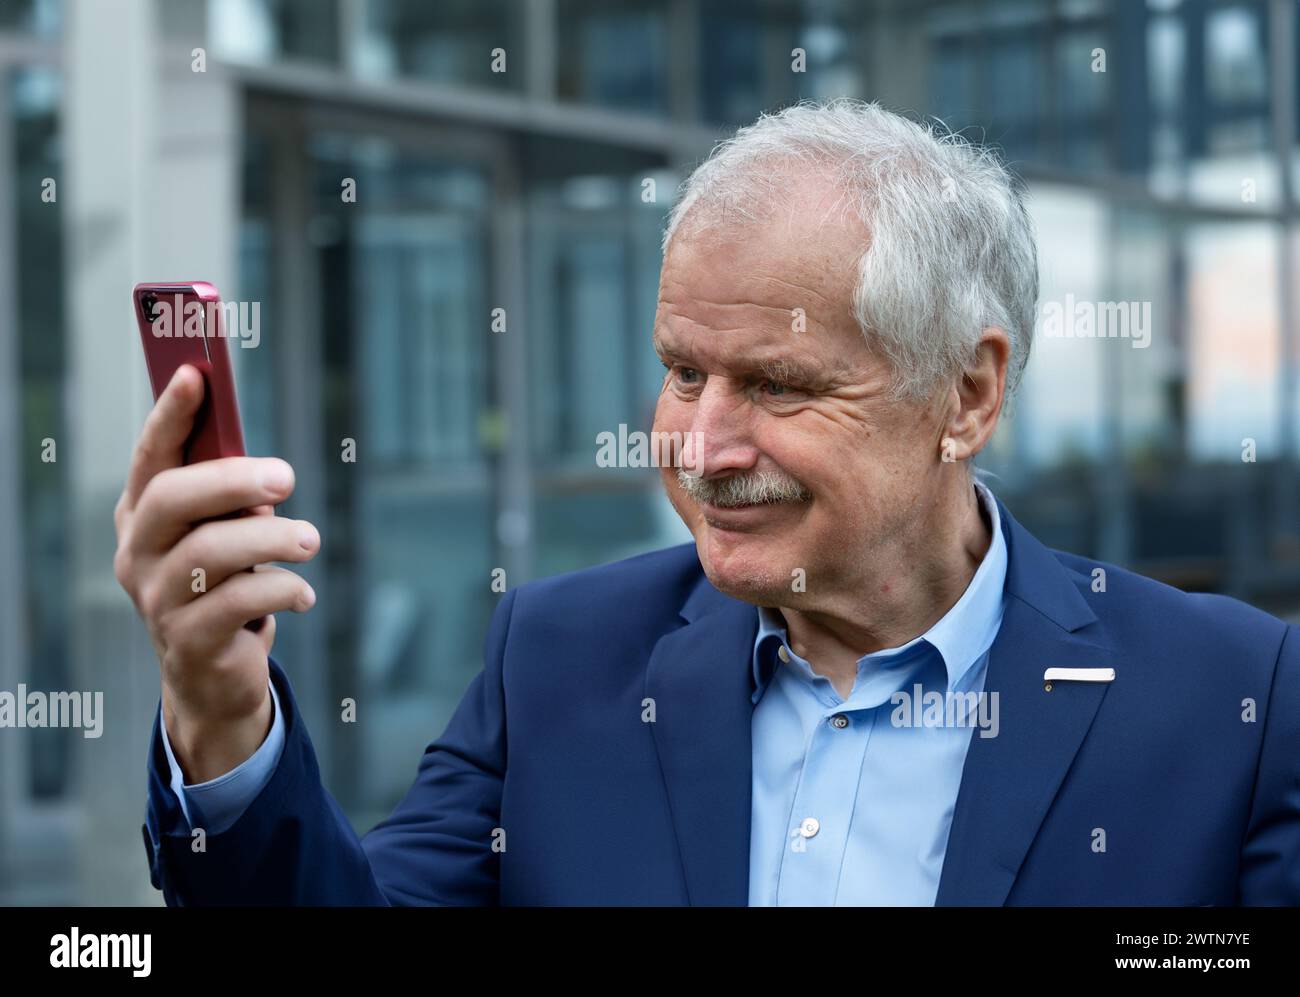 Senior business man looking with a confident smile at his phone. Stock Photo